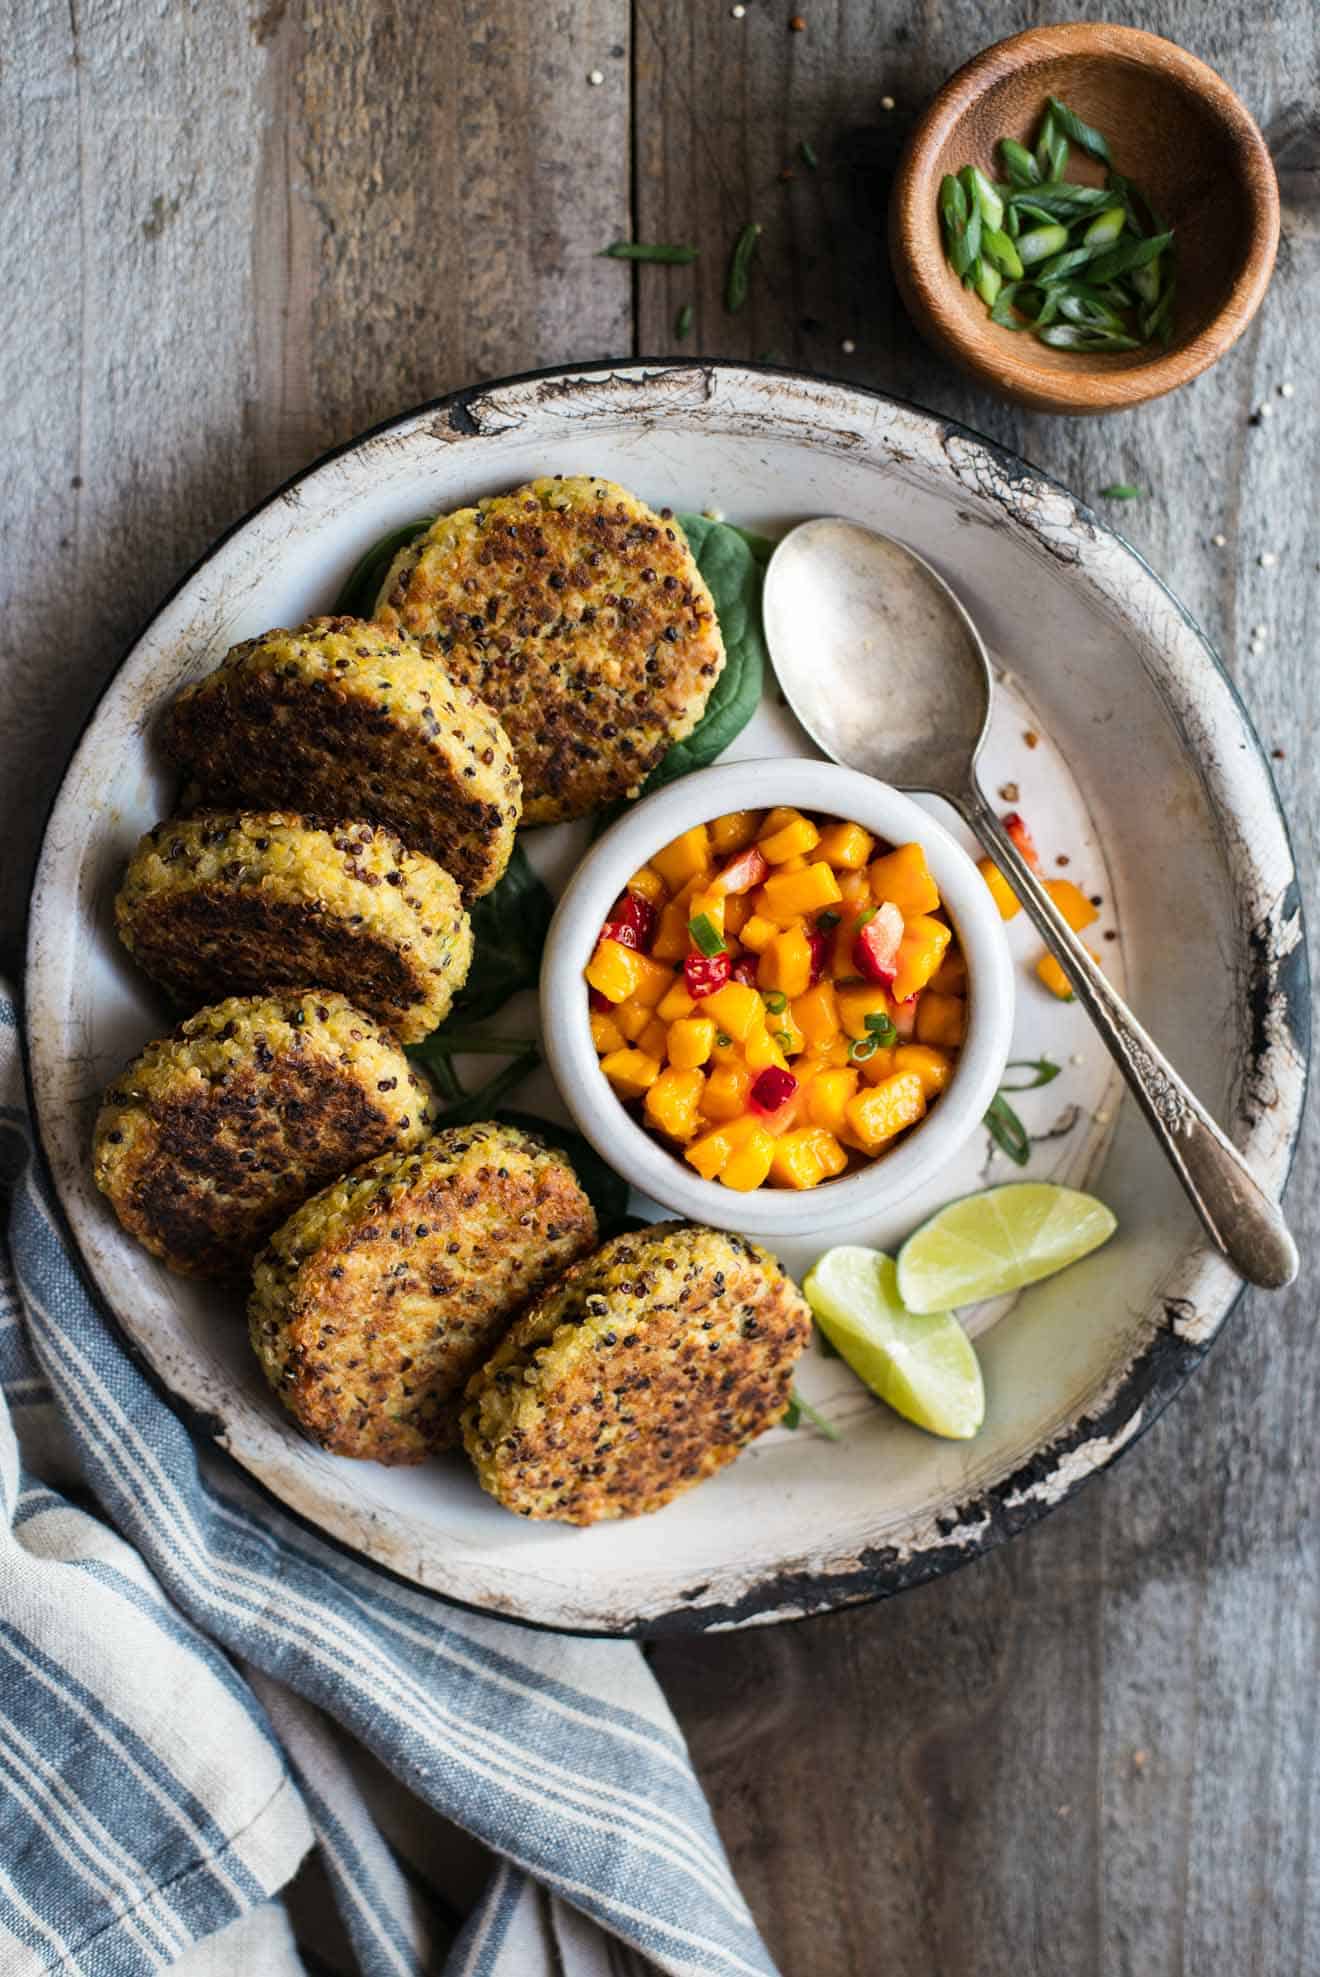 Healthy Quinoa Cakes with Chickpeas and Mango Salsa - these protein packed cakes are great as an appetizer or a meal!